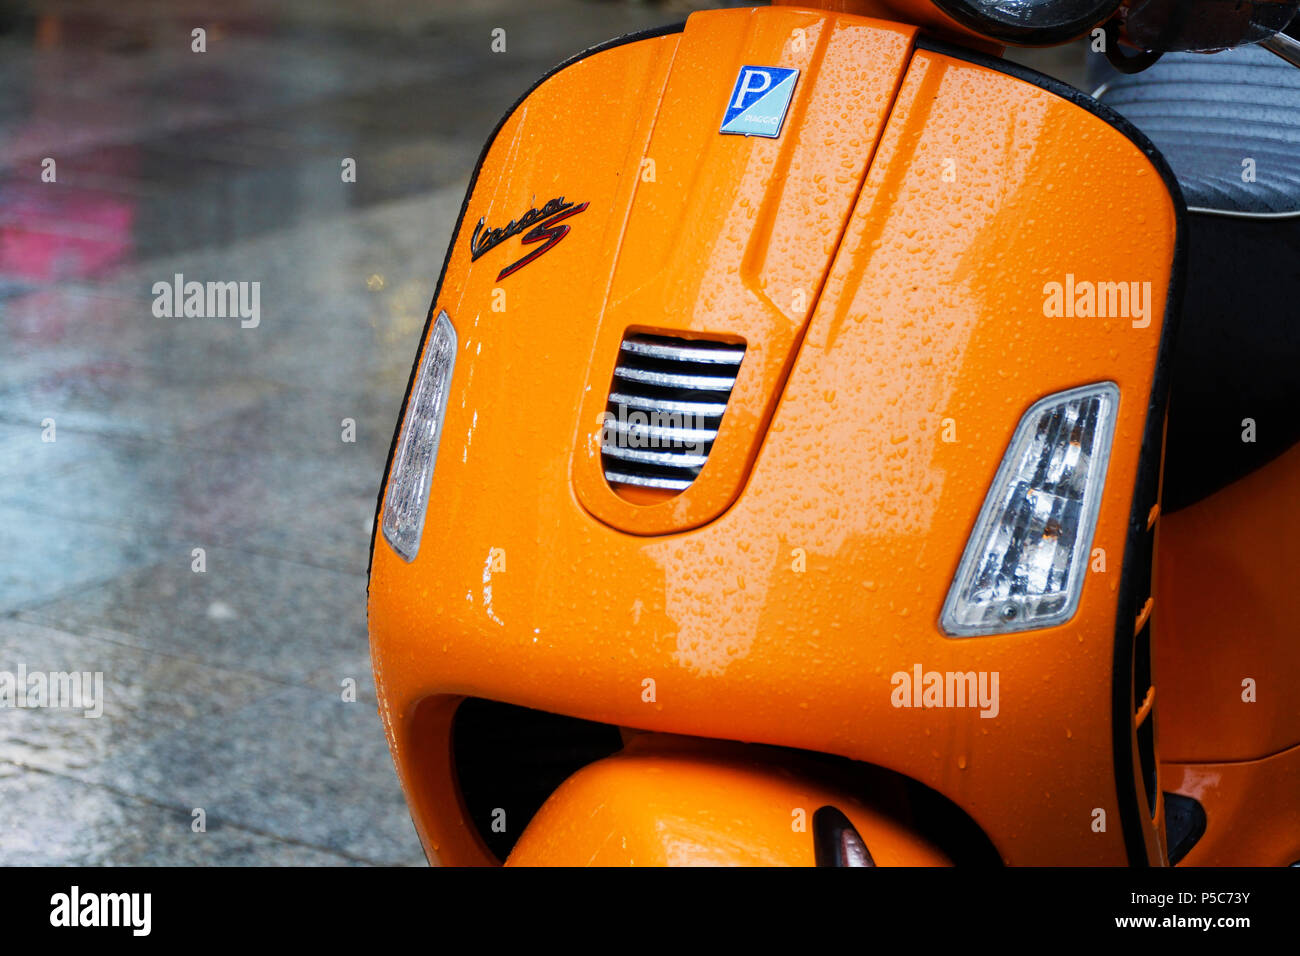 Istanbul, Turkey - December 31, 2016: Details of a wet orange Piaggio Vespa S in a rainy day at Istanbul Kadikoy. Stock Photo